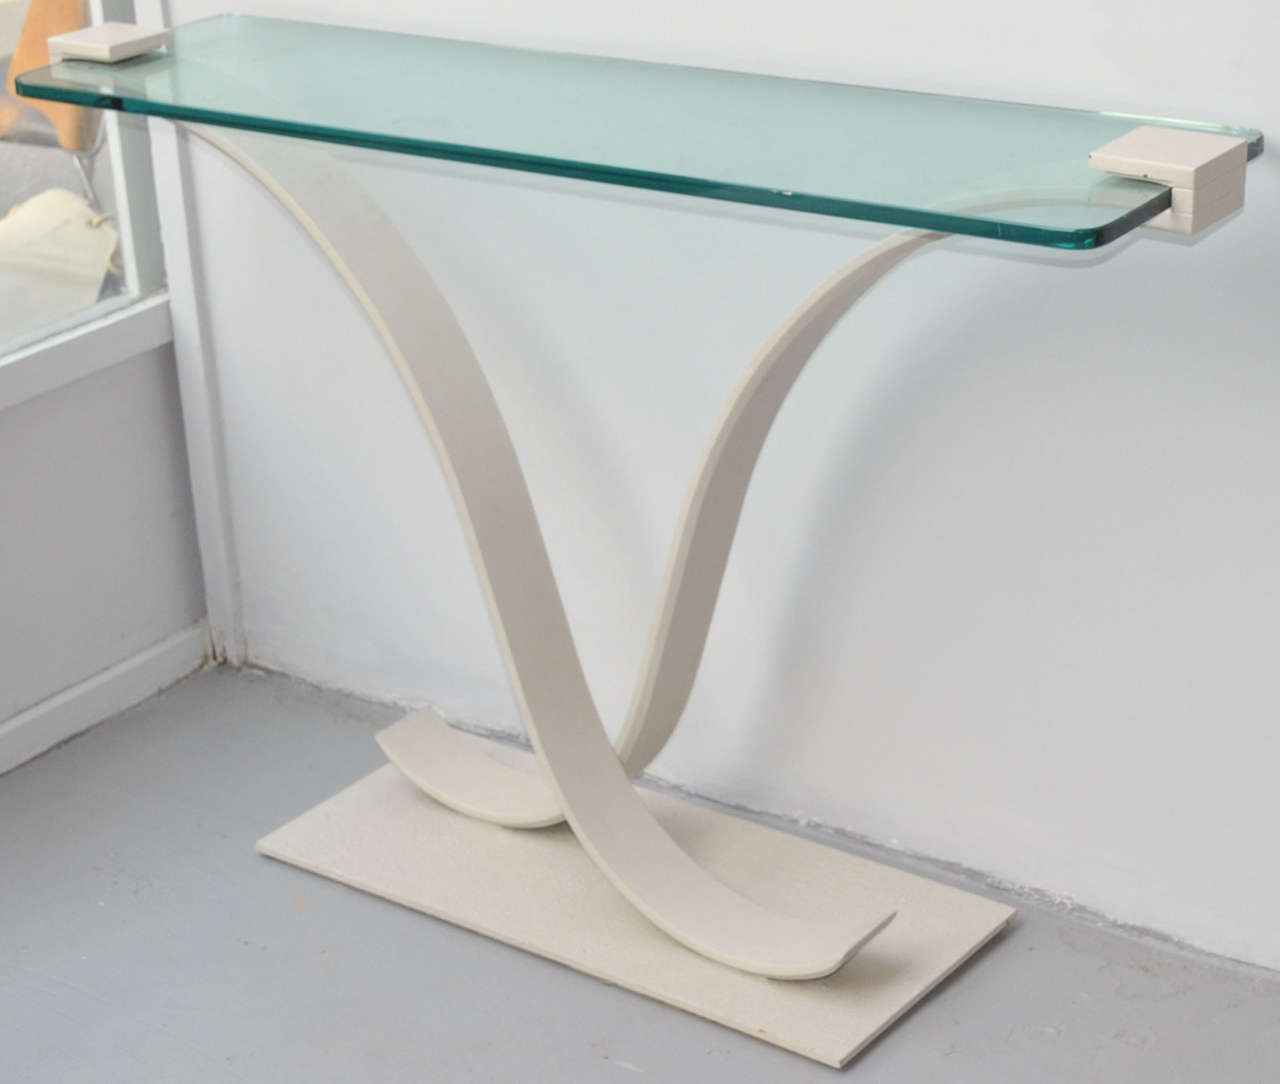 1980s console table with base in off-white patina metal and glass top.